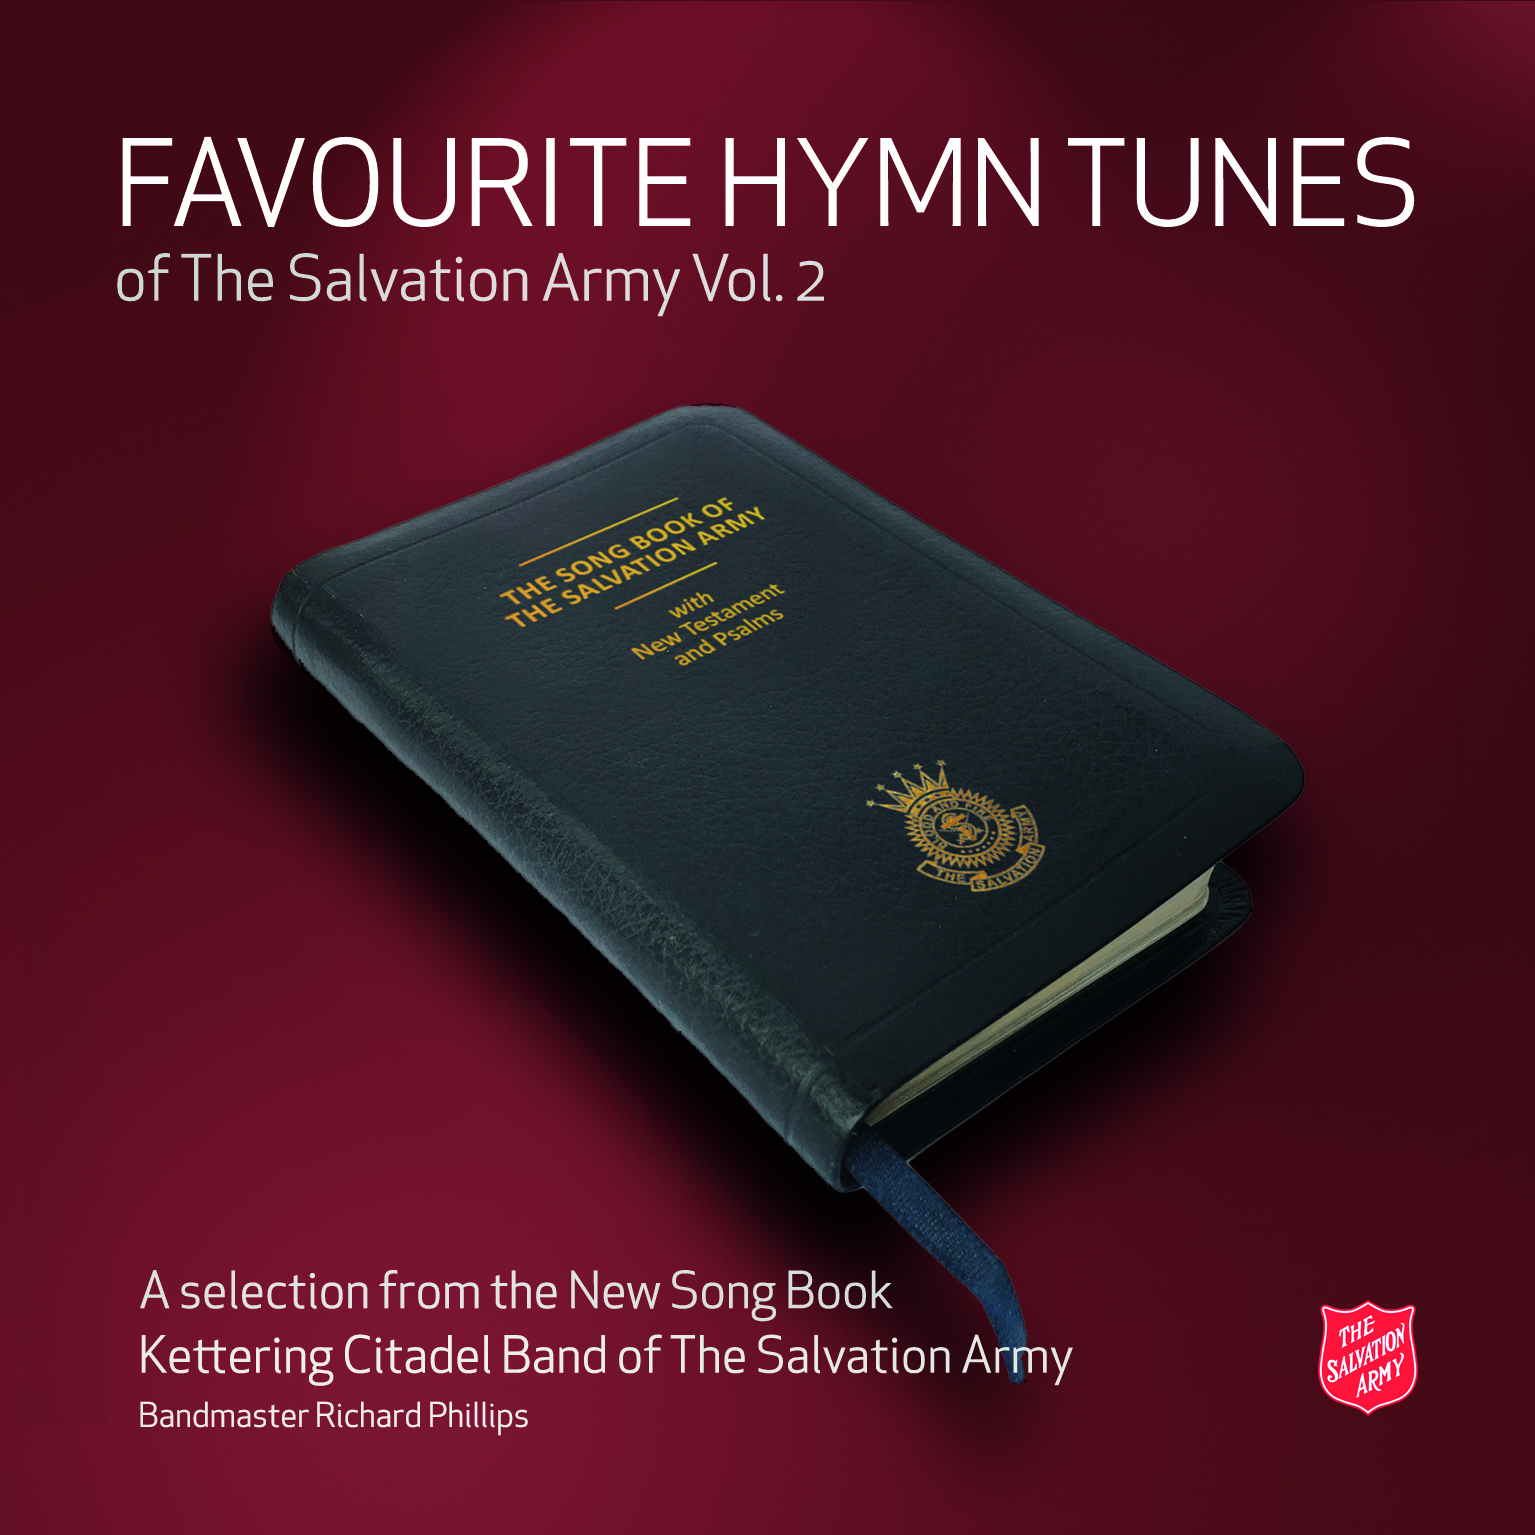 Favourite Hymn Tunes of The Salvation Army Vol. 2 - Download